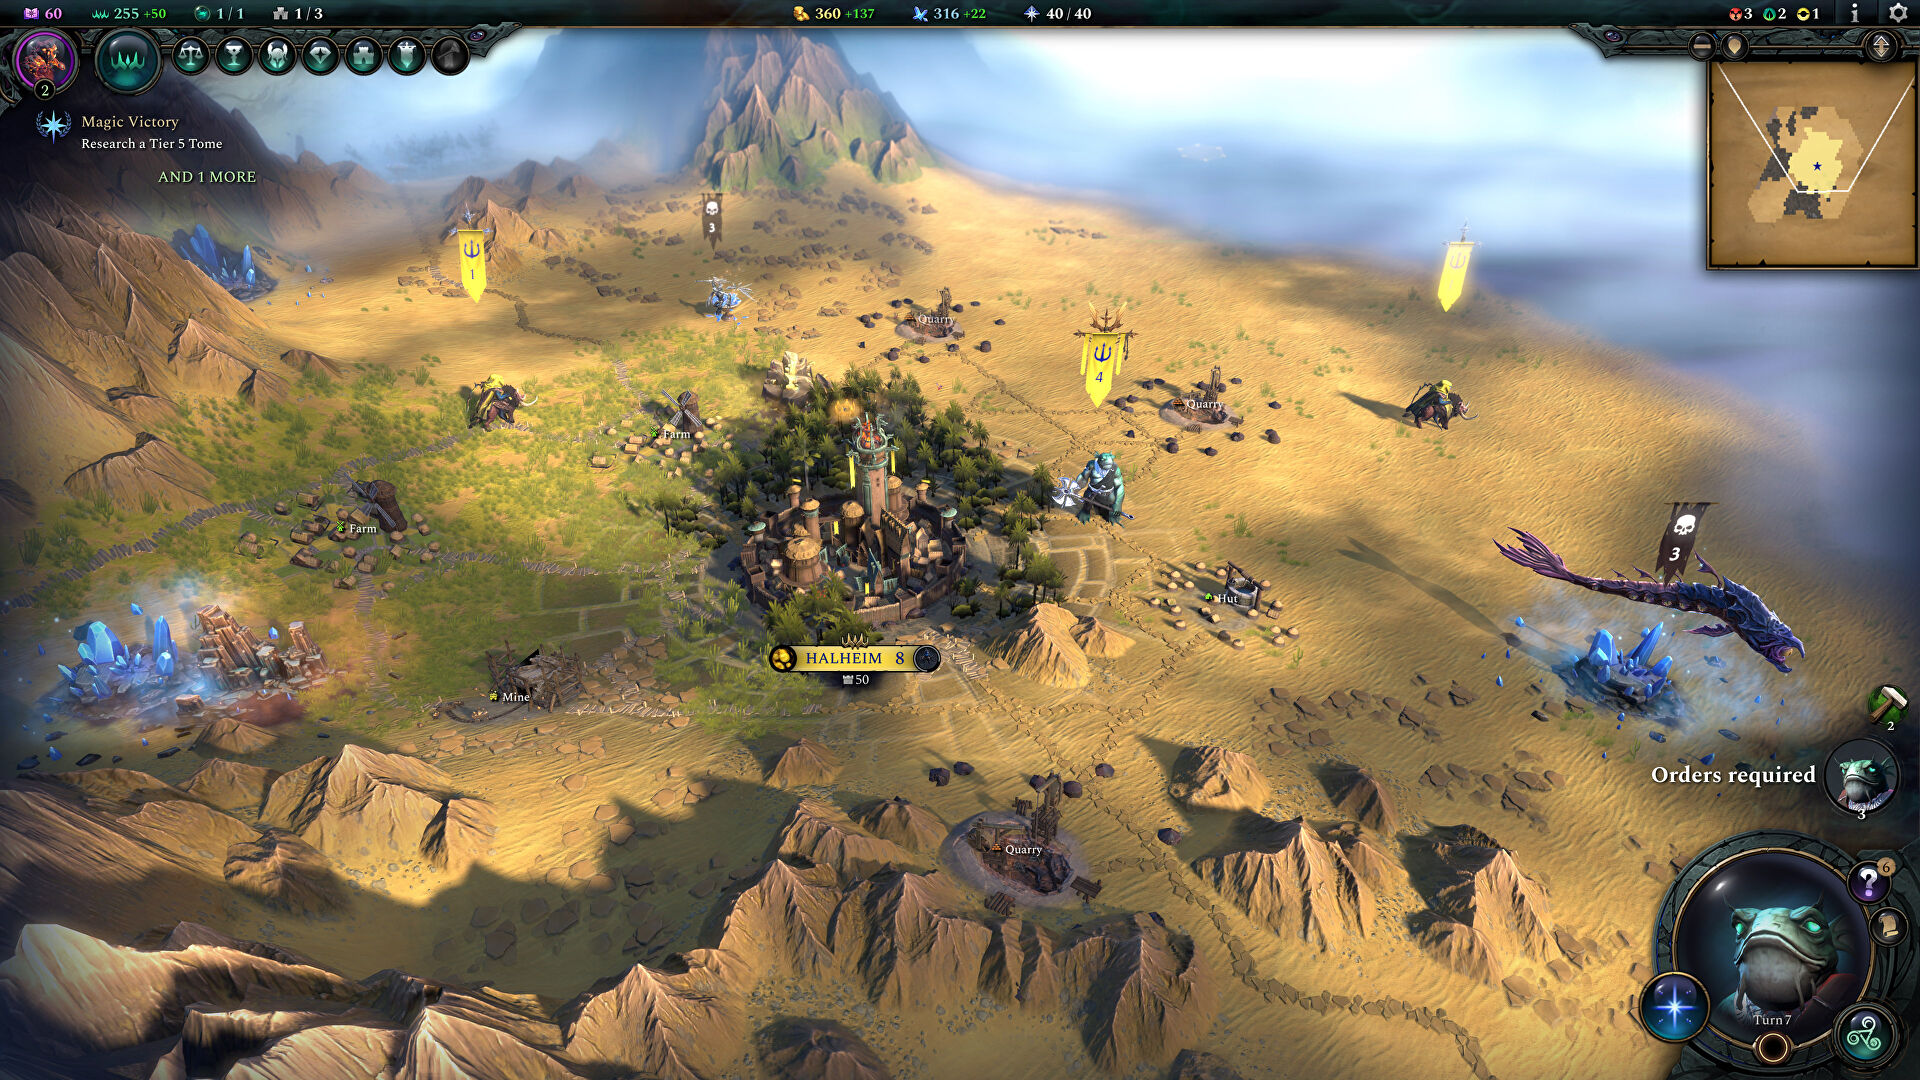 Age Of Wonders 4 is 4X fantasy with the scope and breadth of a D&D RPG. Rock Paper Shotgun